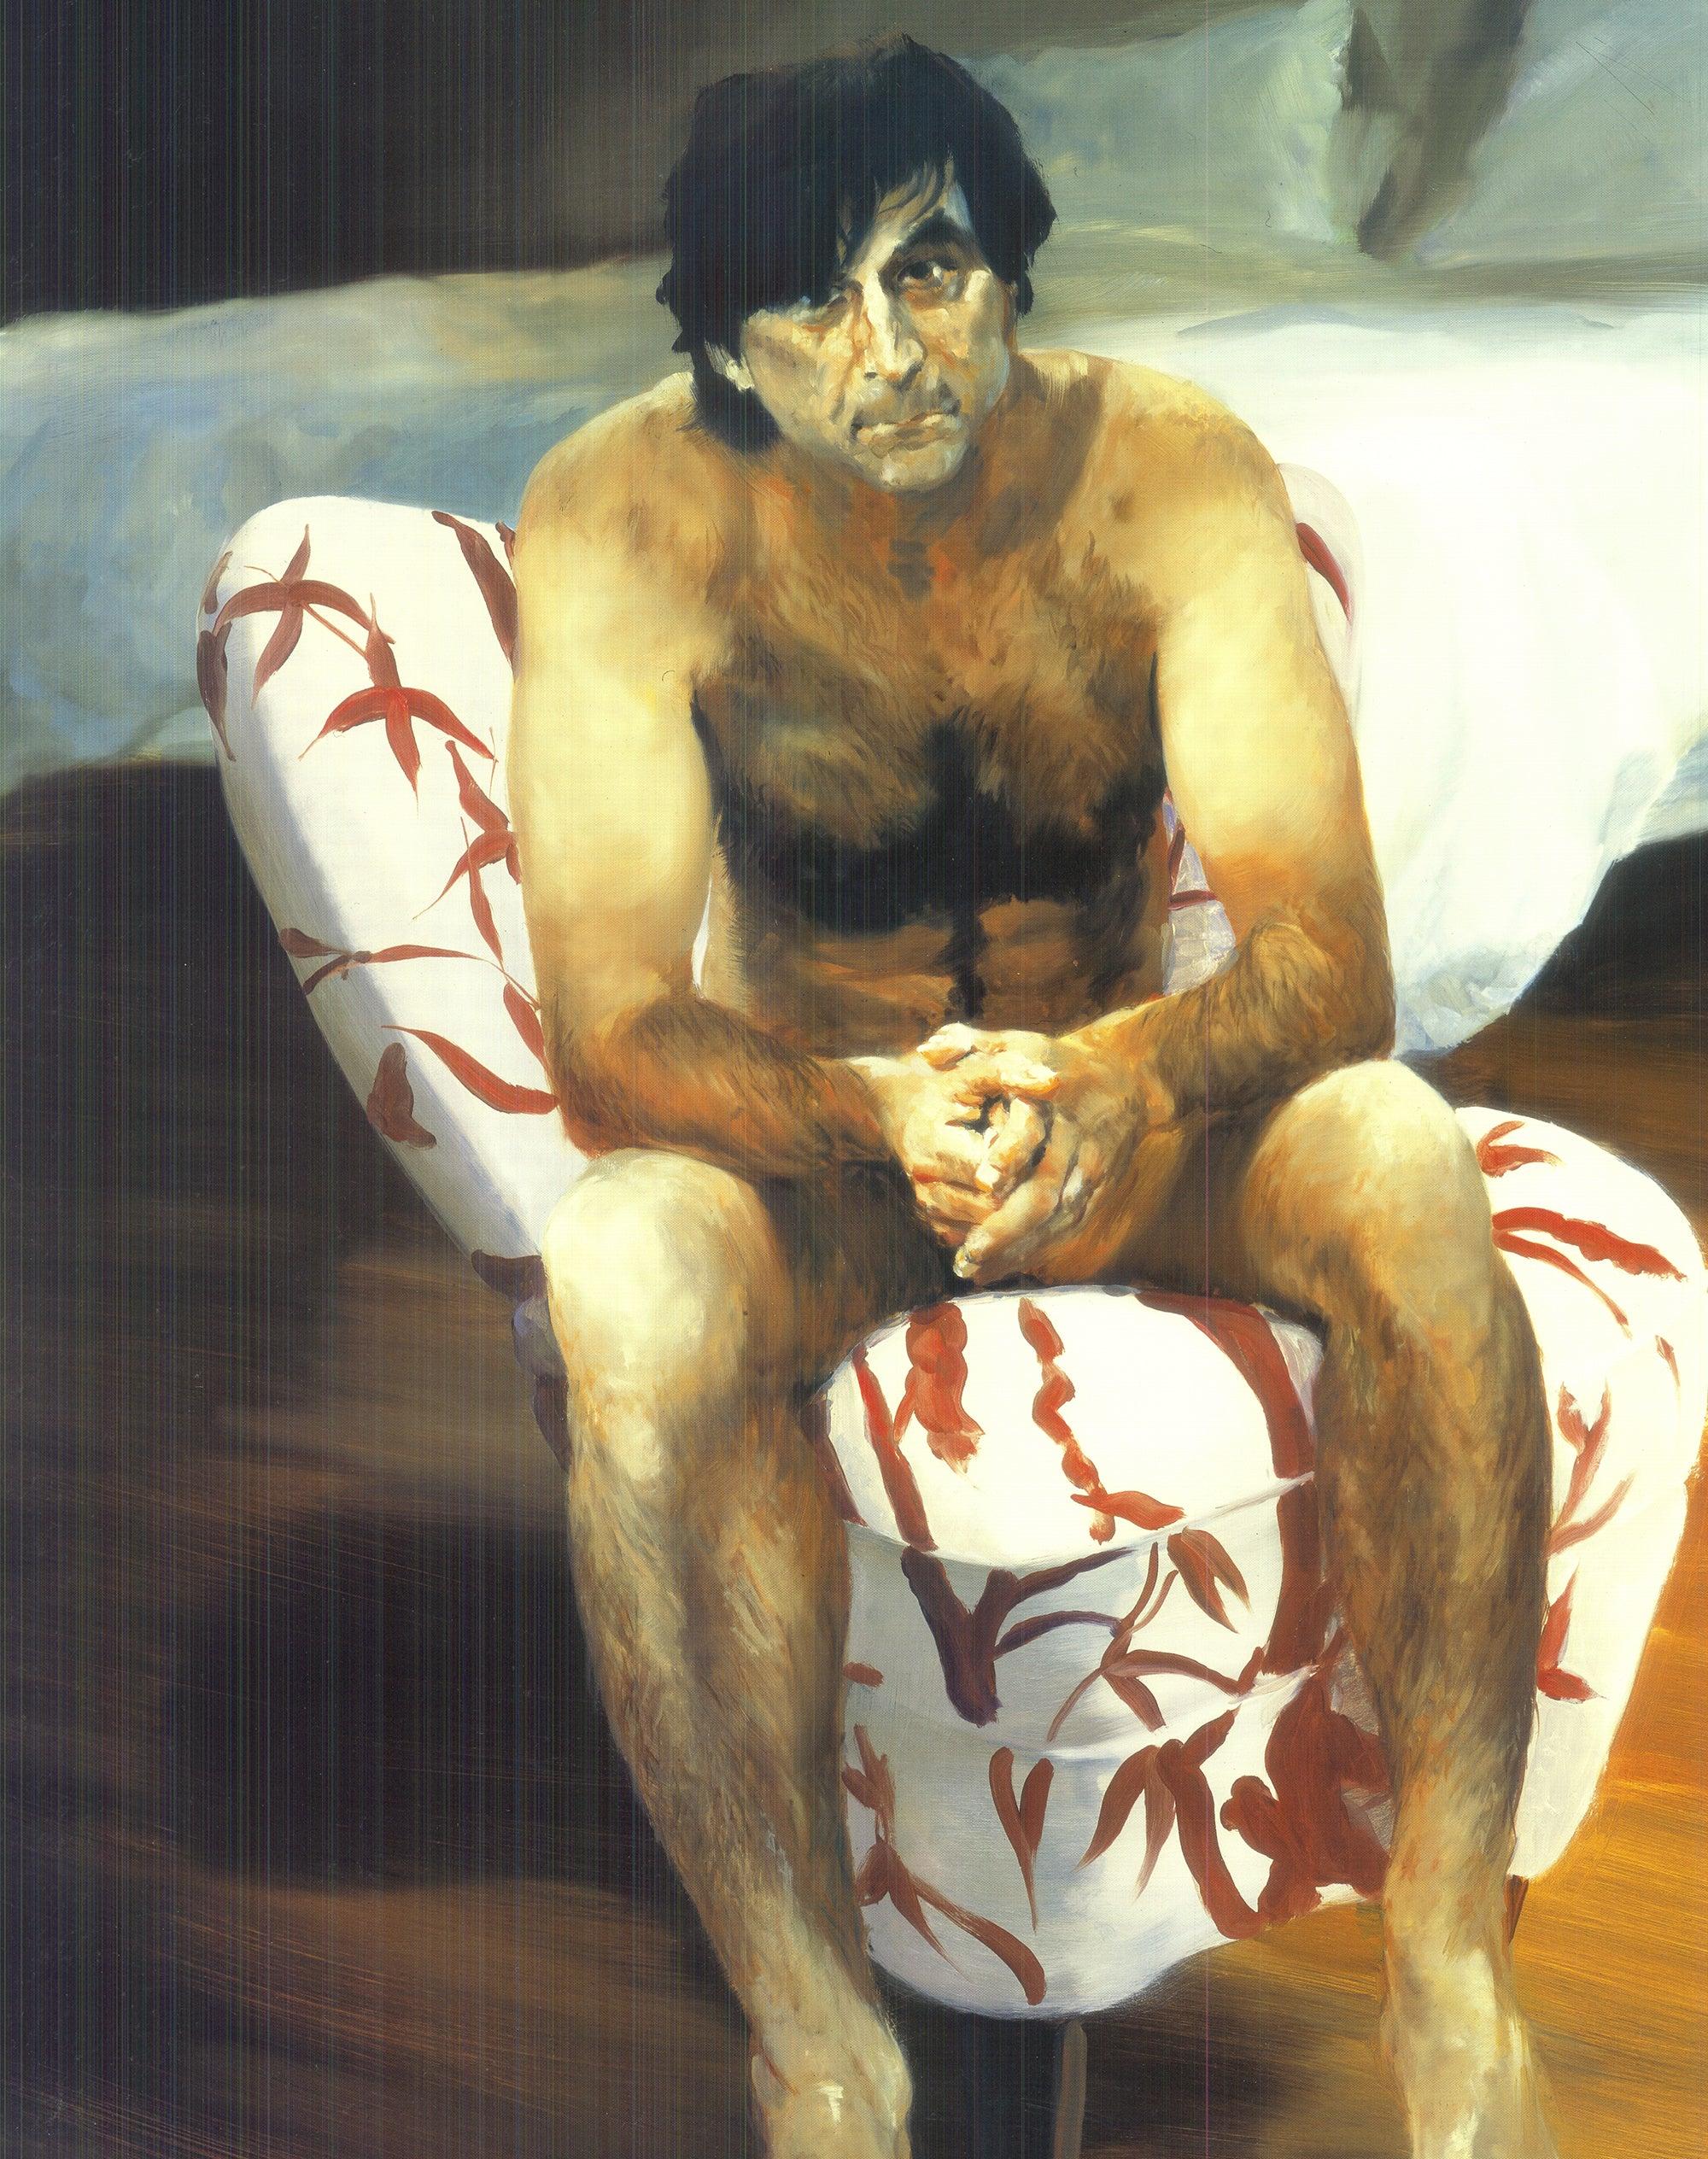 1984 Eric Fischl 'The Bed, the Chair, the Dancer